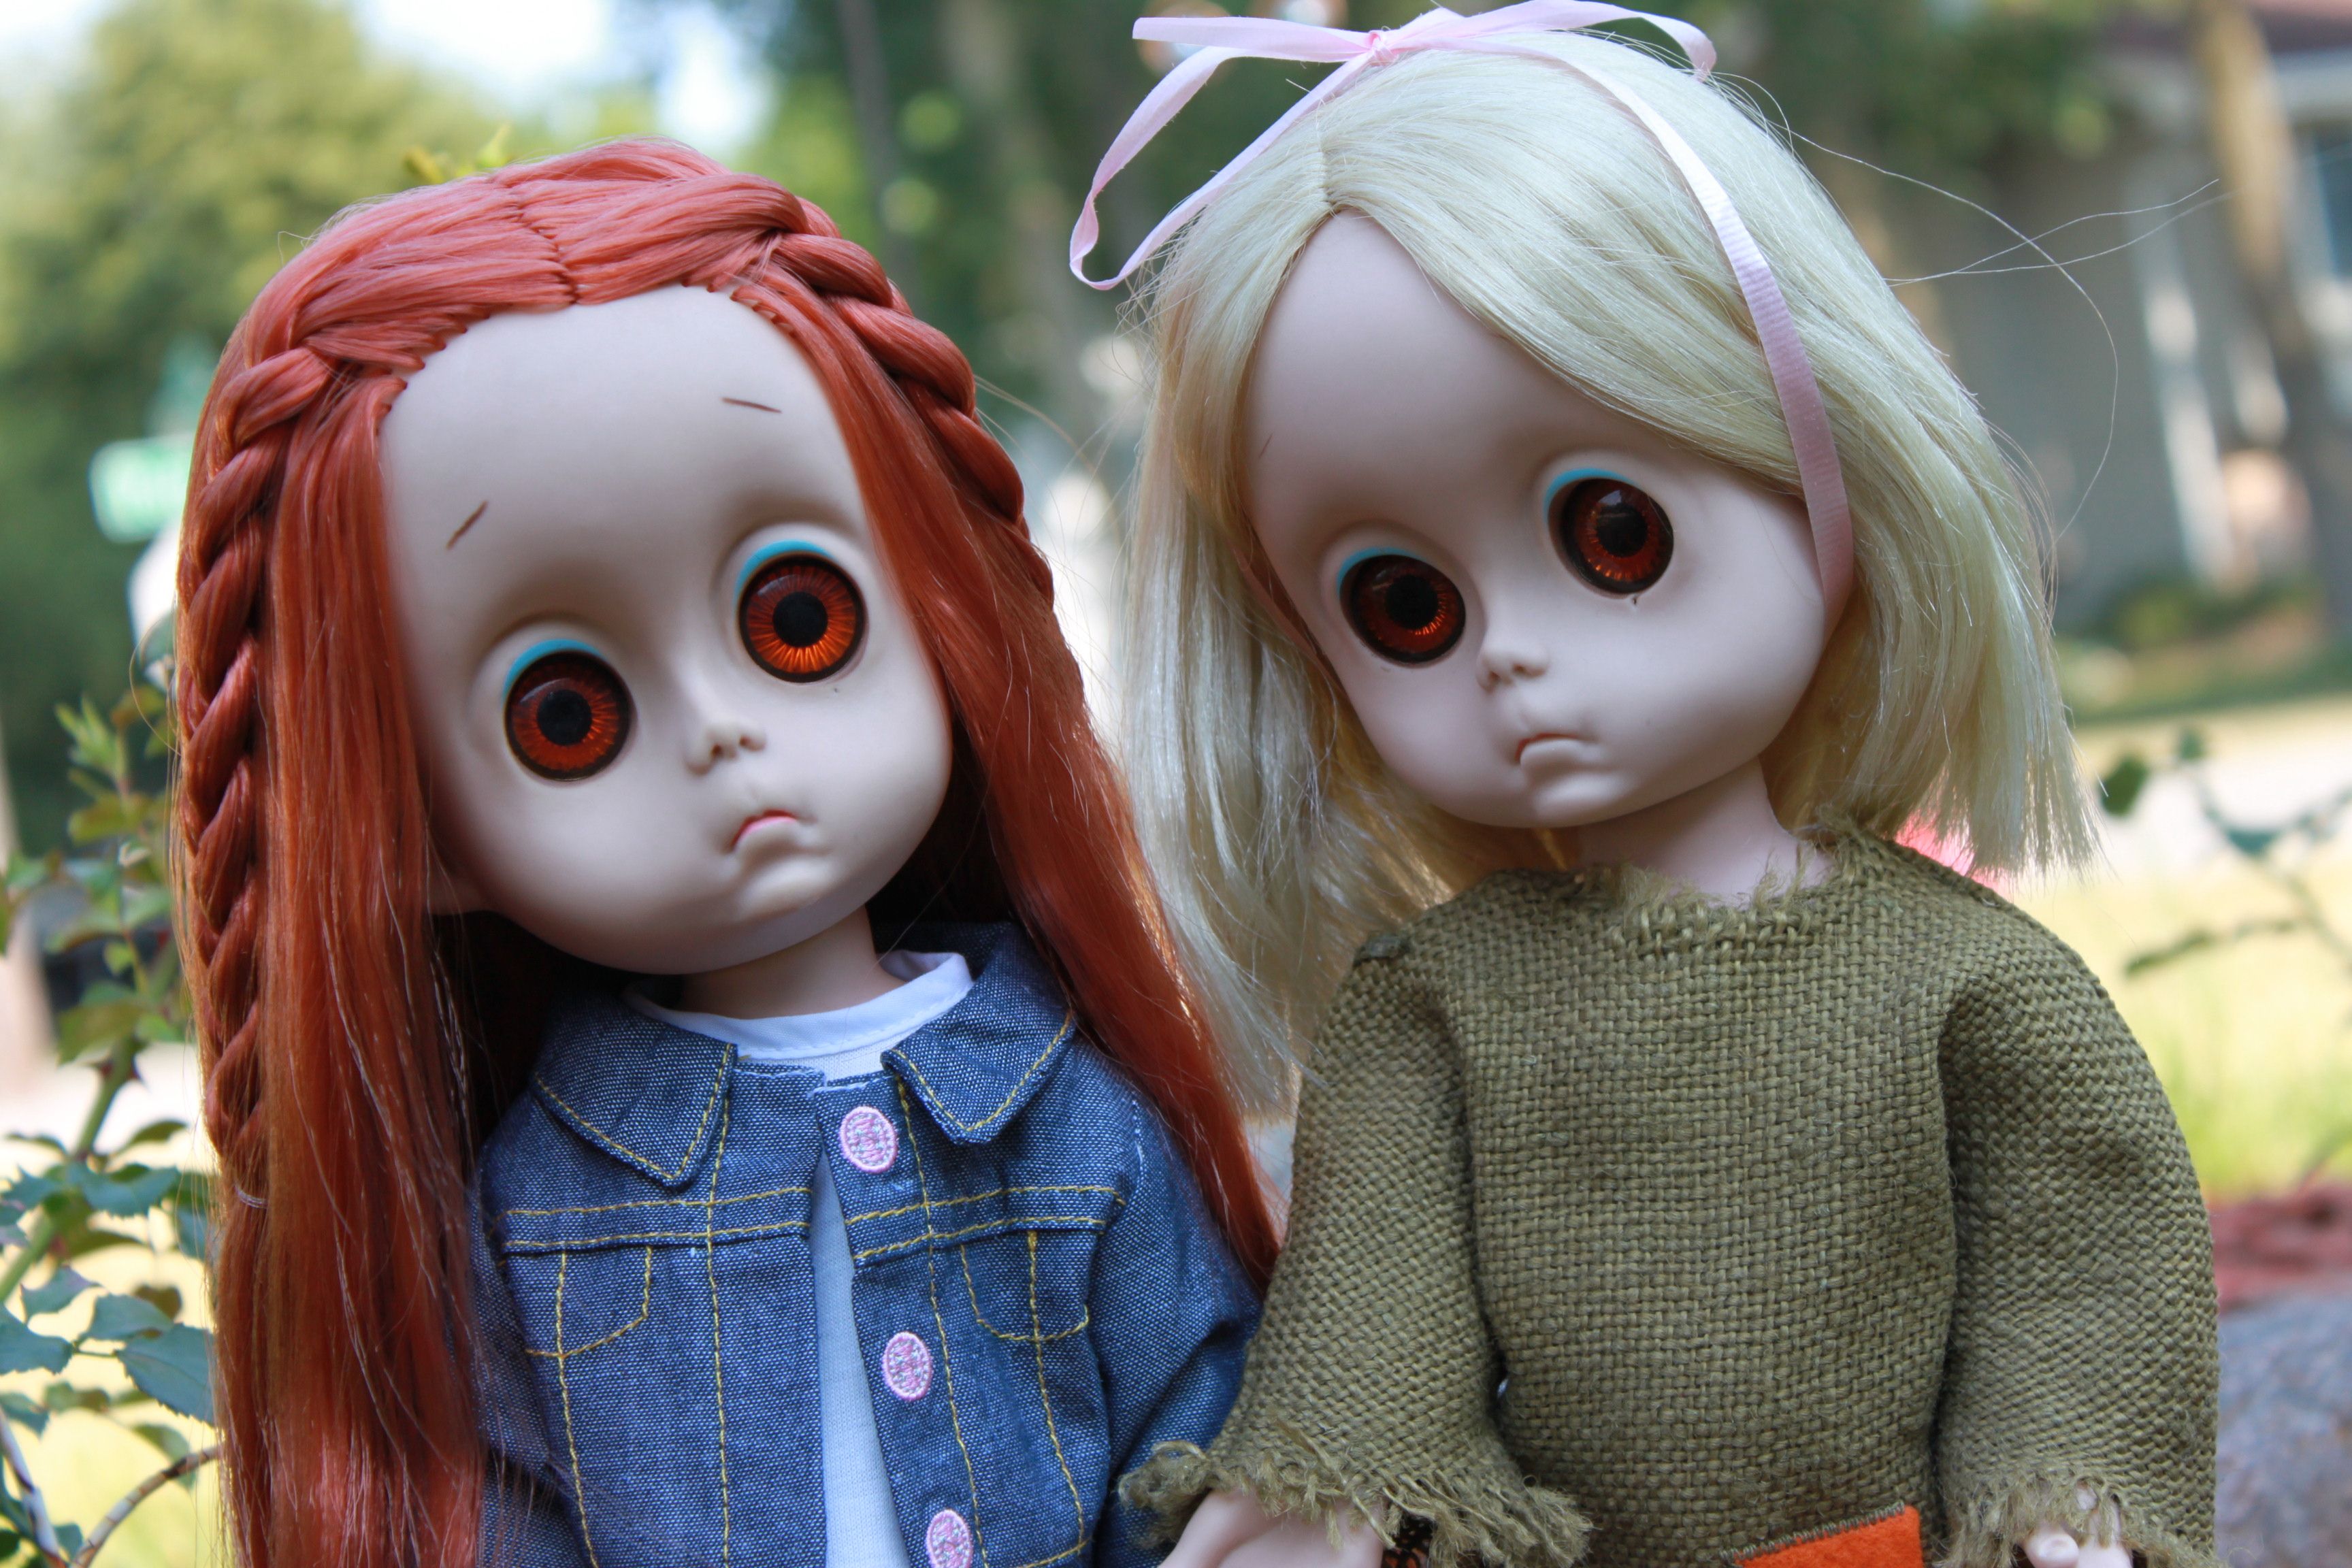 10 Toys From Our Childhood That Are Way Creepier Than We Remember